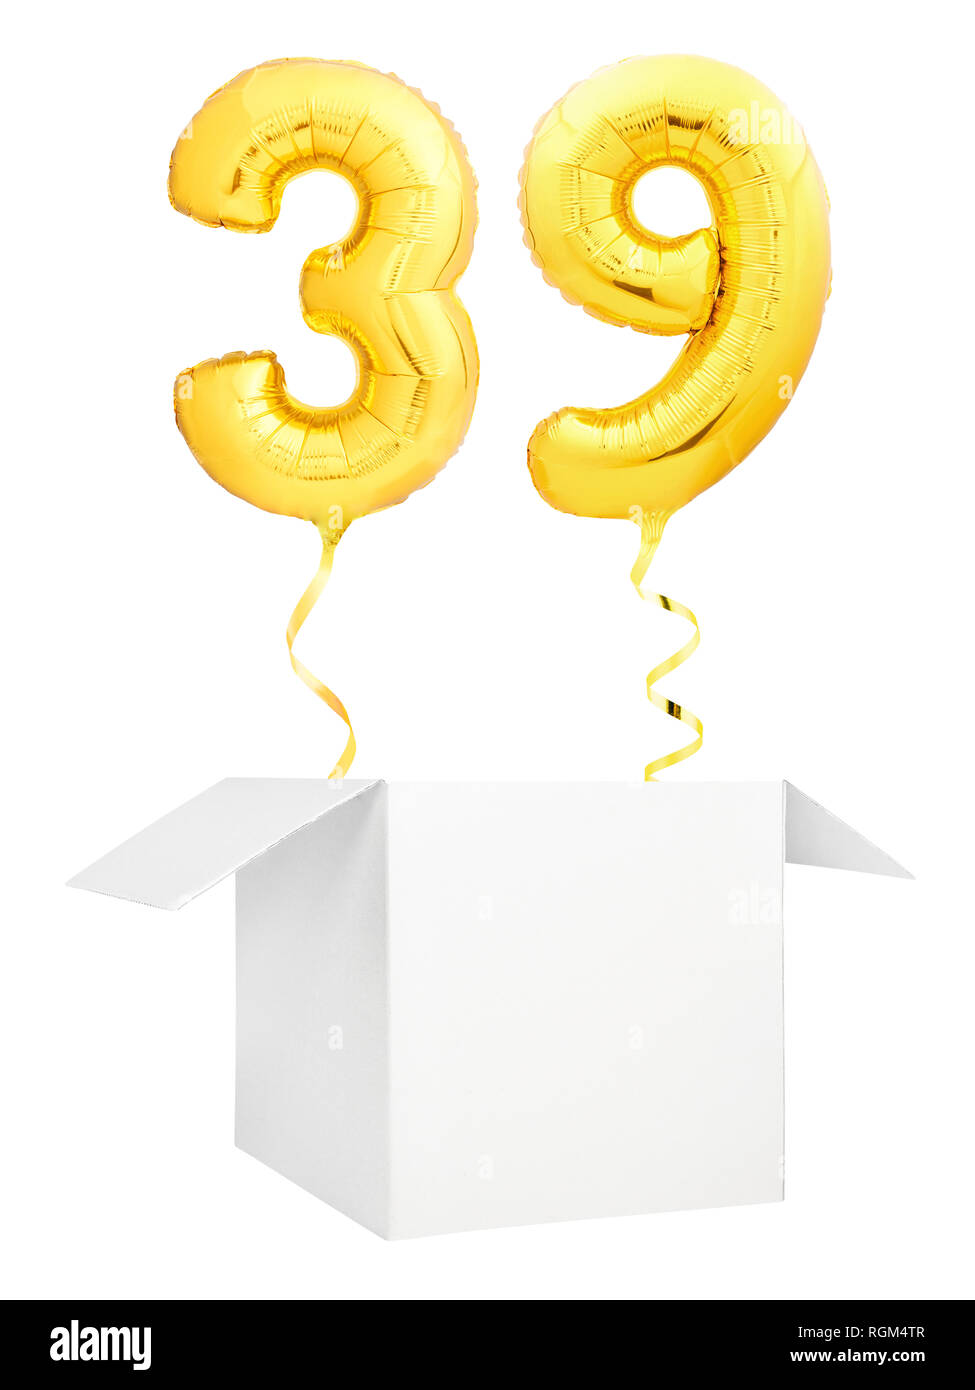 Golden number thirty nine inflatable balloon with golden ribbon flying out of blank white box isolated on white background Stock Photo